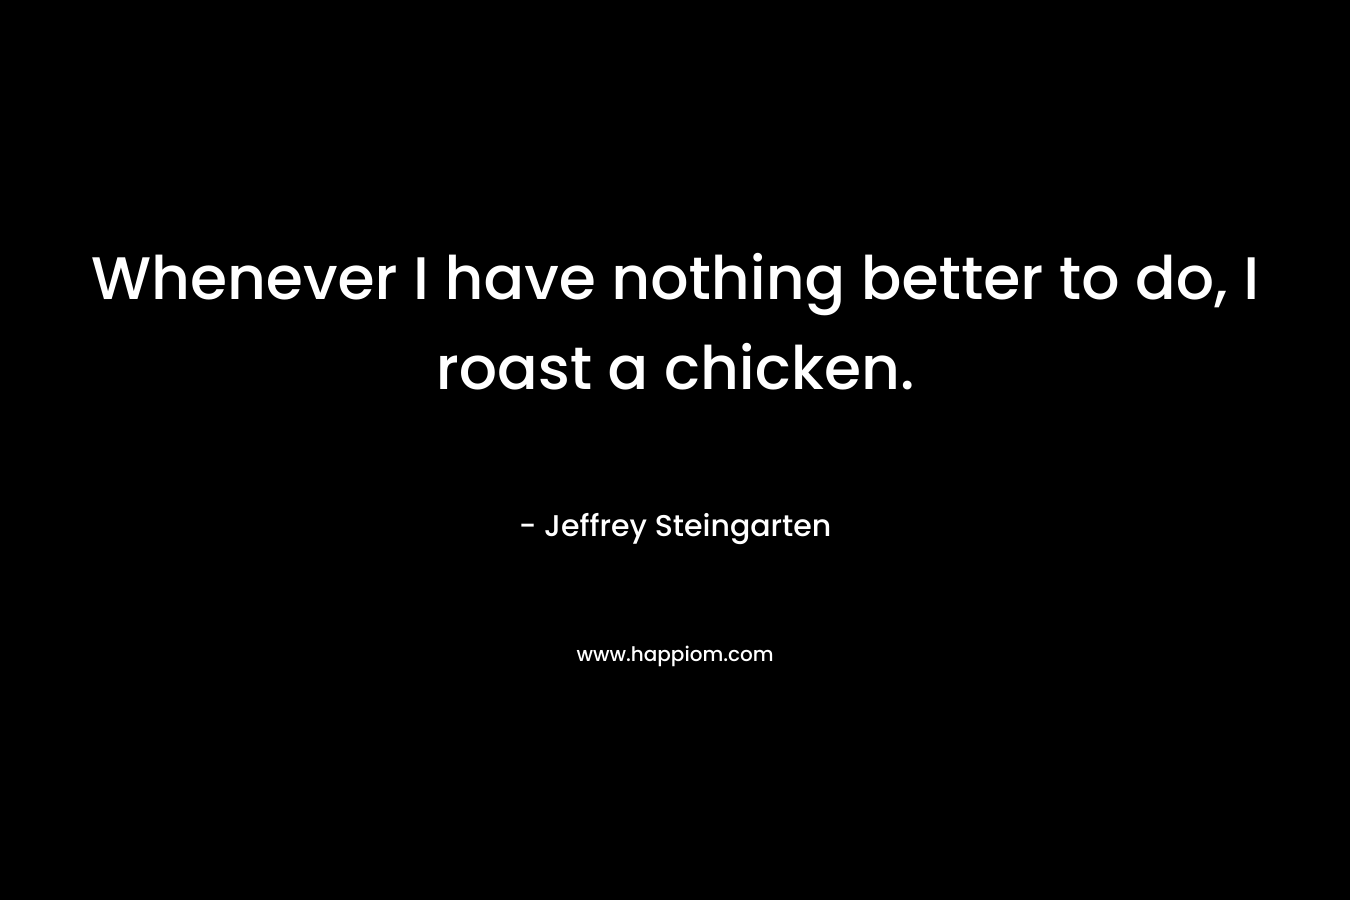 Whenever I have nothing better to do, I roast a chicken.